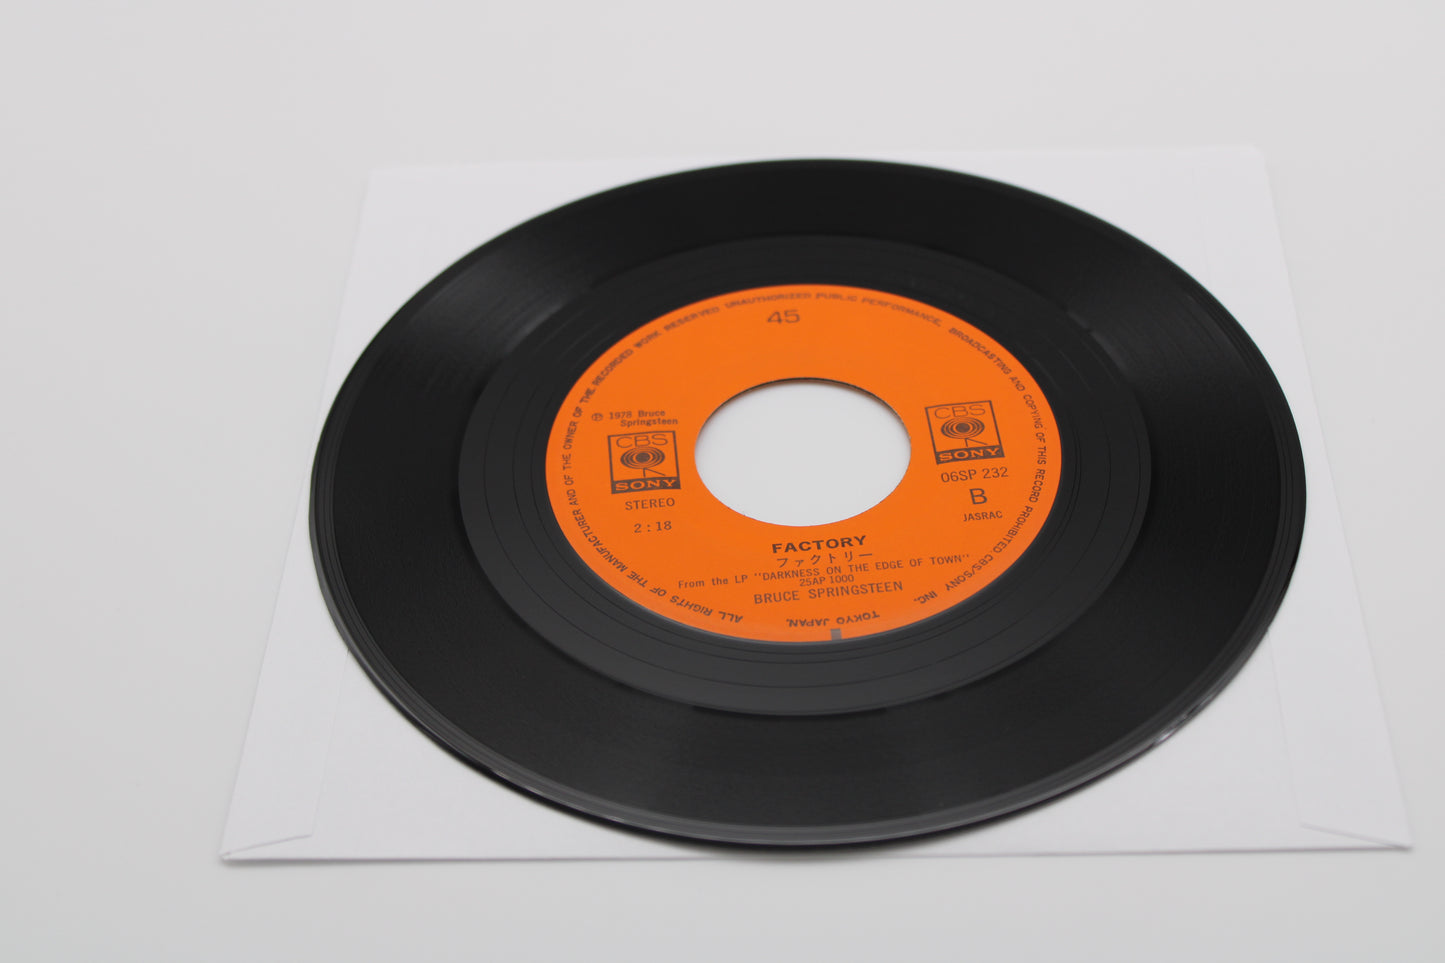 Bruce Springsteen 45 record Prove it all Night 暗闇へ突走れ =1978 Japan release Collectible